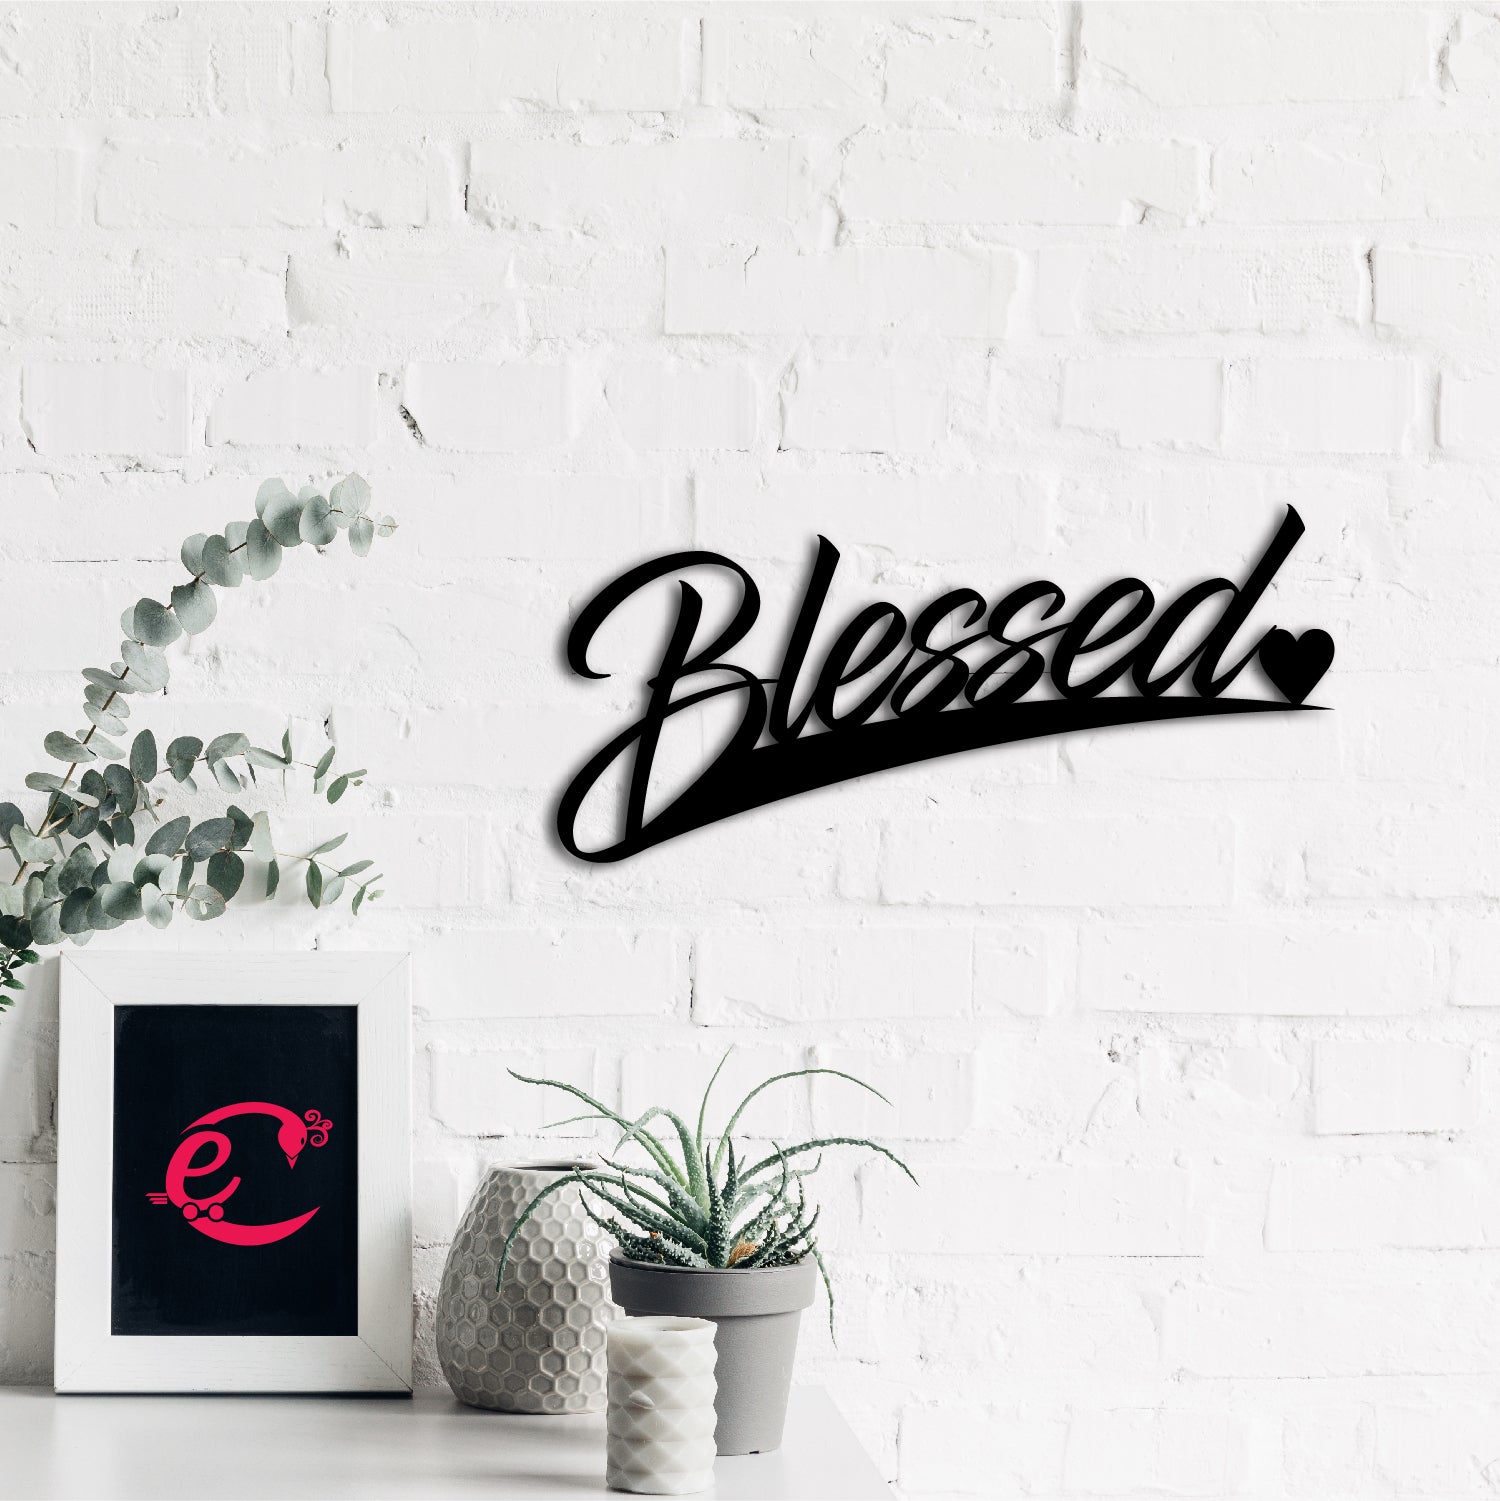 Blessed Black Engineered Wood Wall Art Cutout, Ready To Hang Home Decor 3